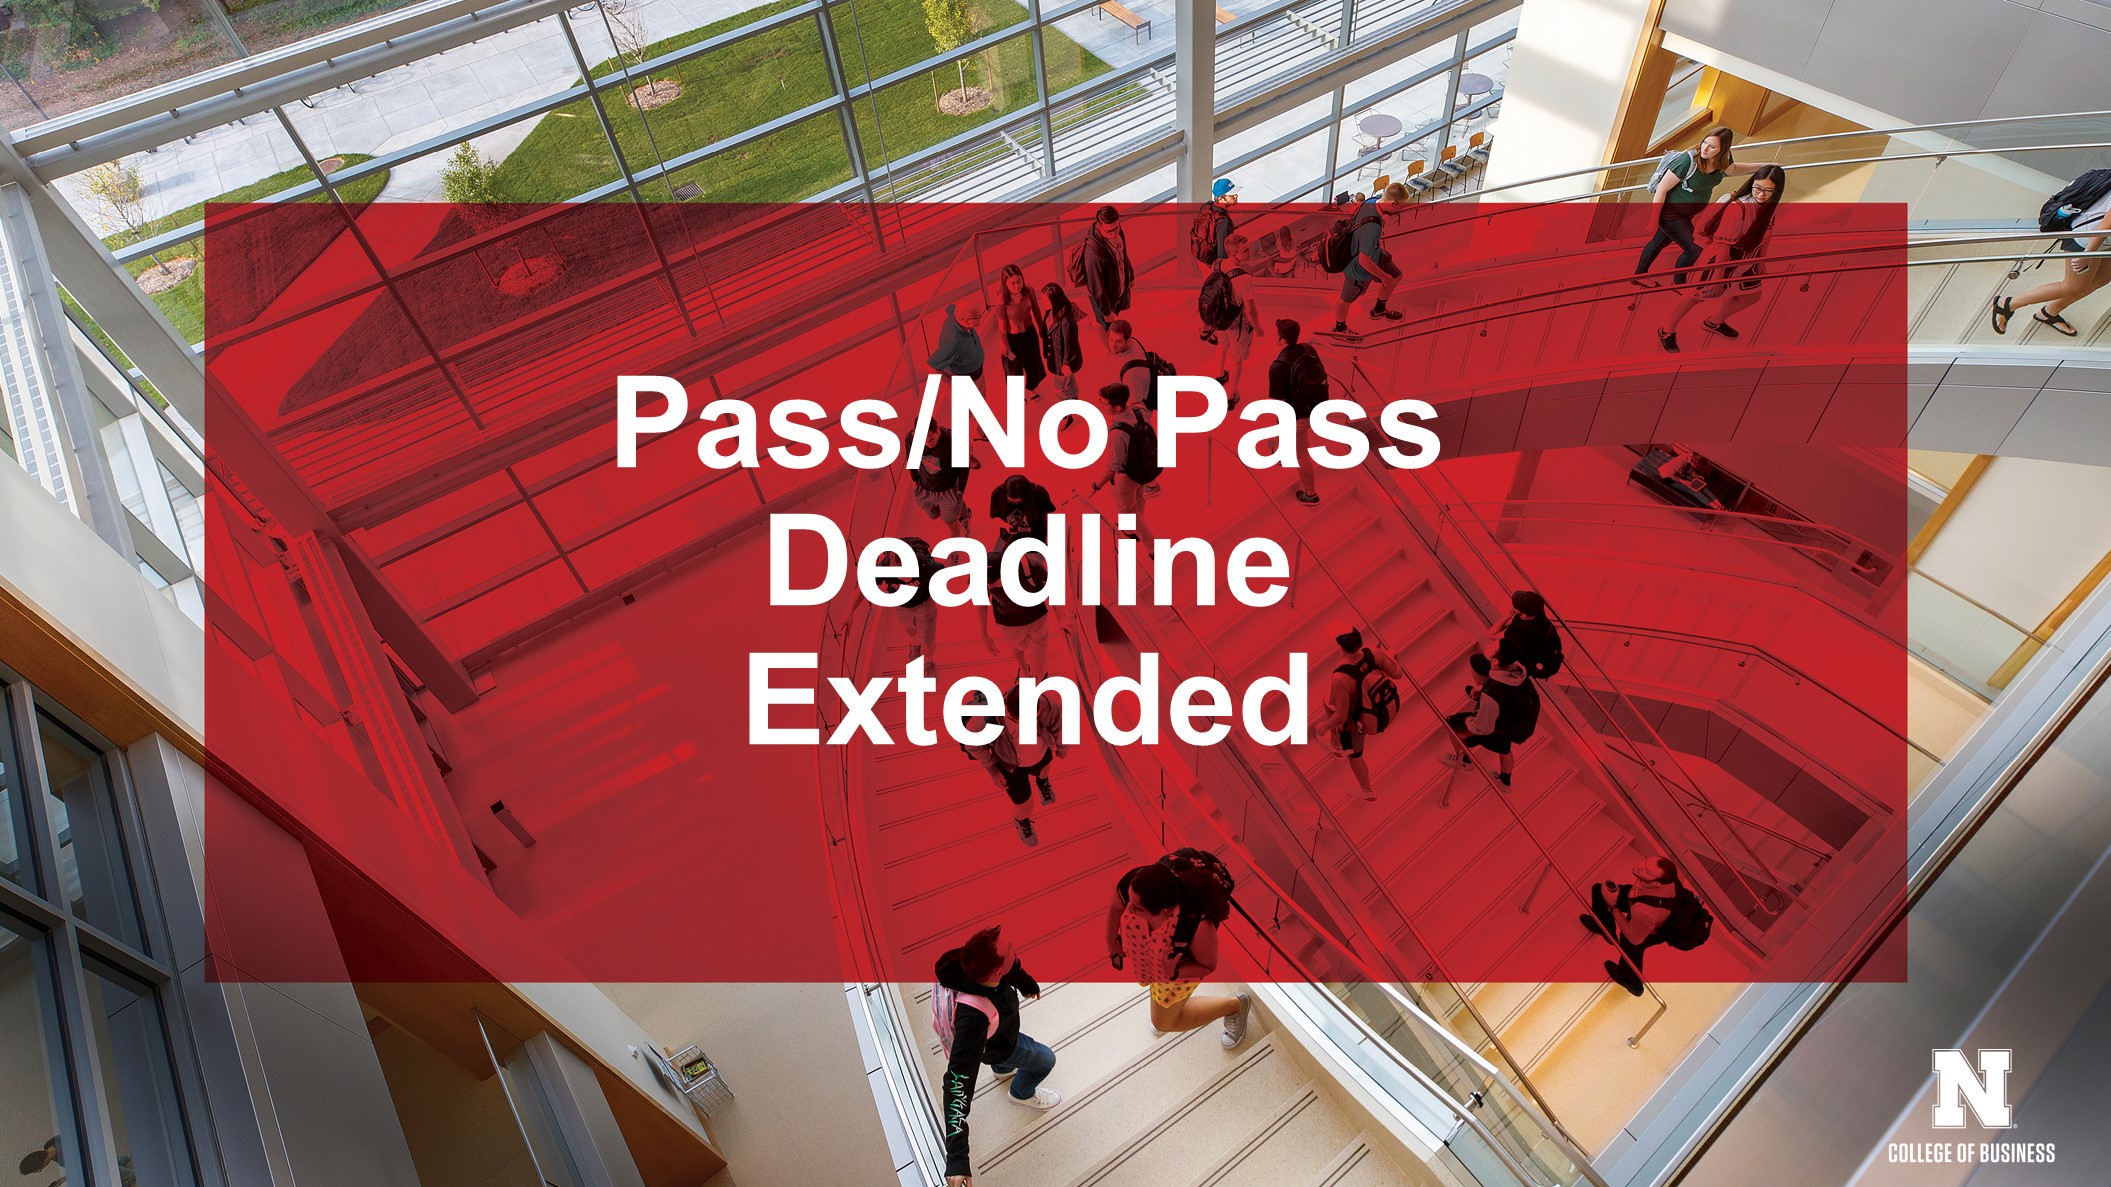 Pass/No Pass deadline extended to May 29